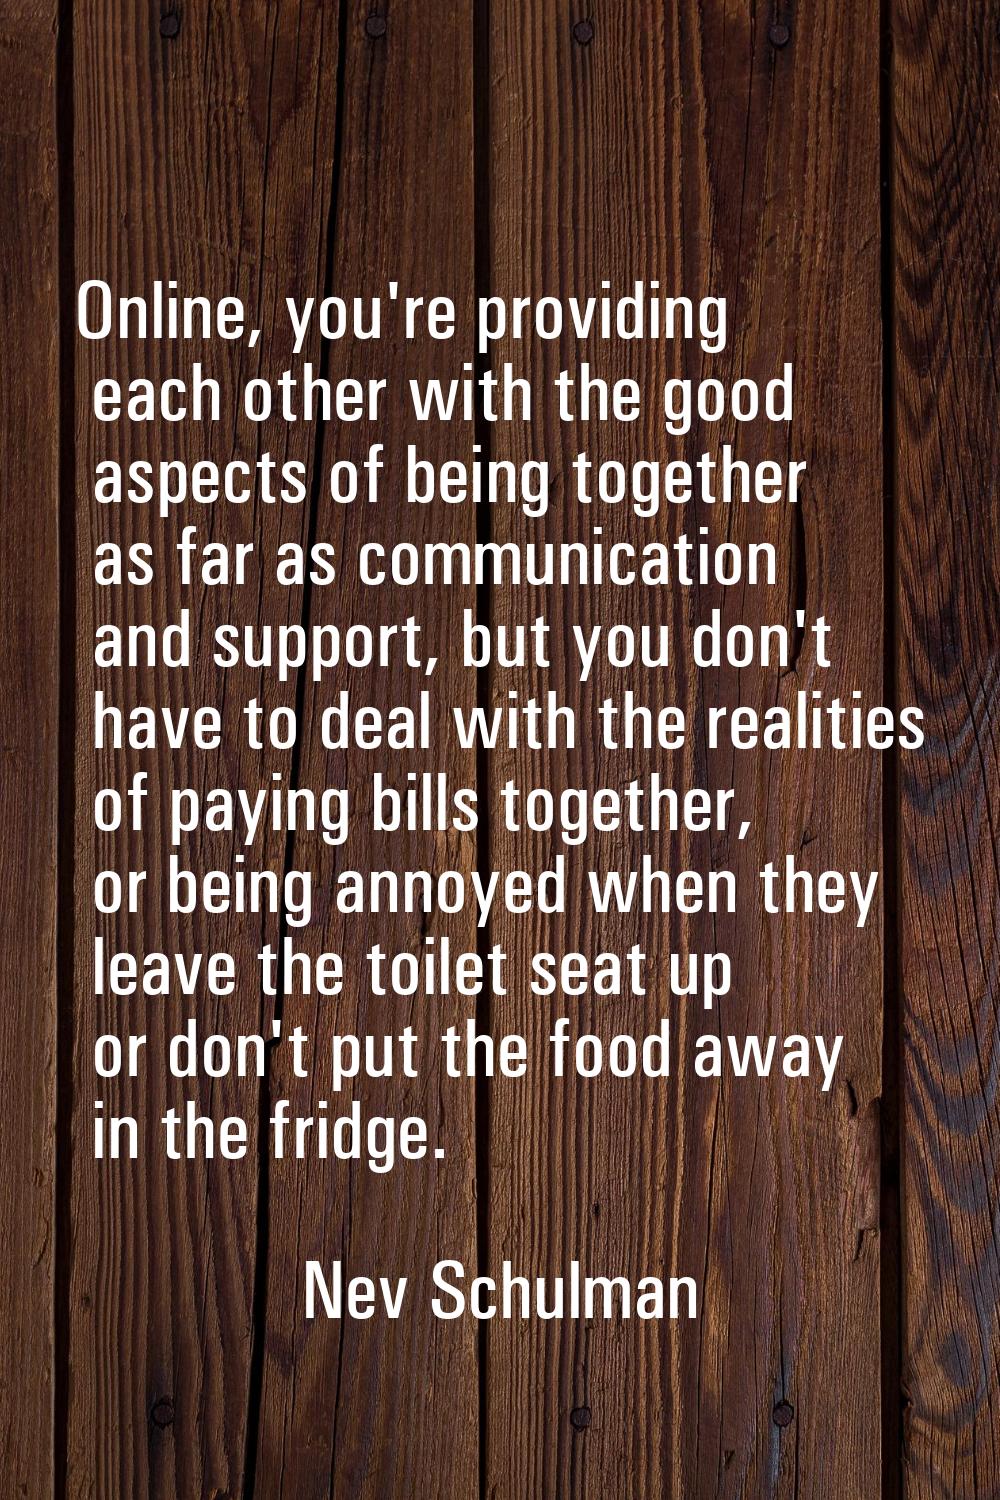 Online, you're providing each other with the good aspects of being together as far as communication